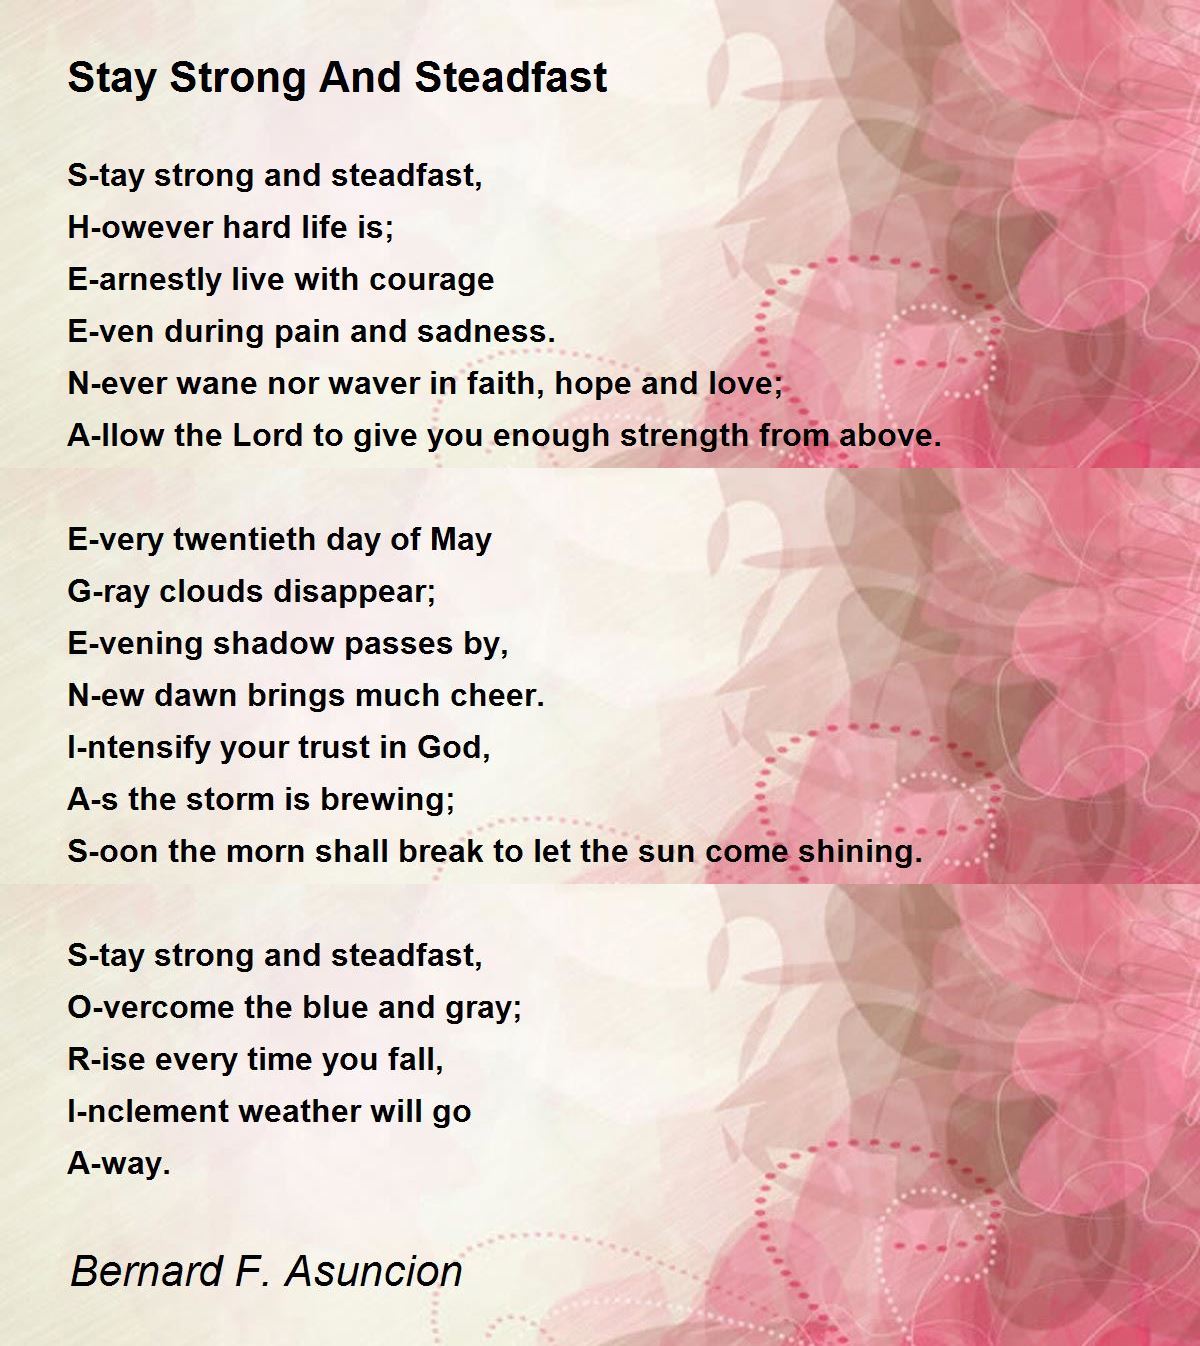 Stay Strong And Steadfast - Stay Strong And Steadfast Poem by ...